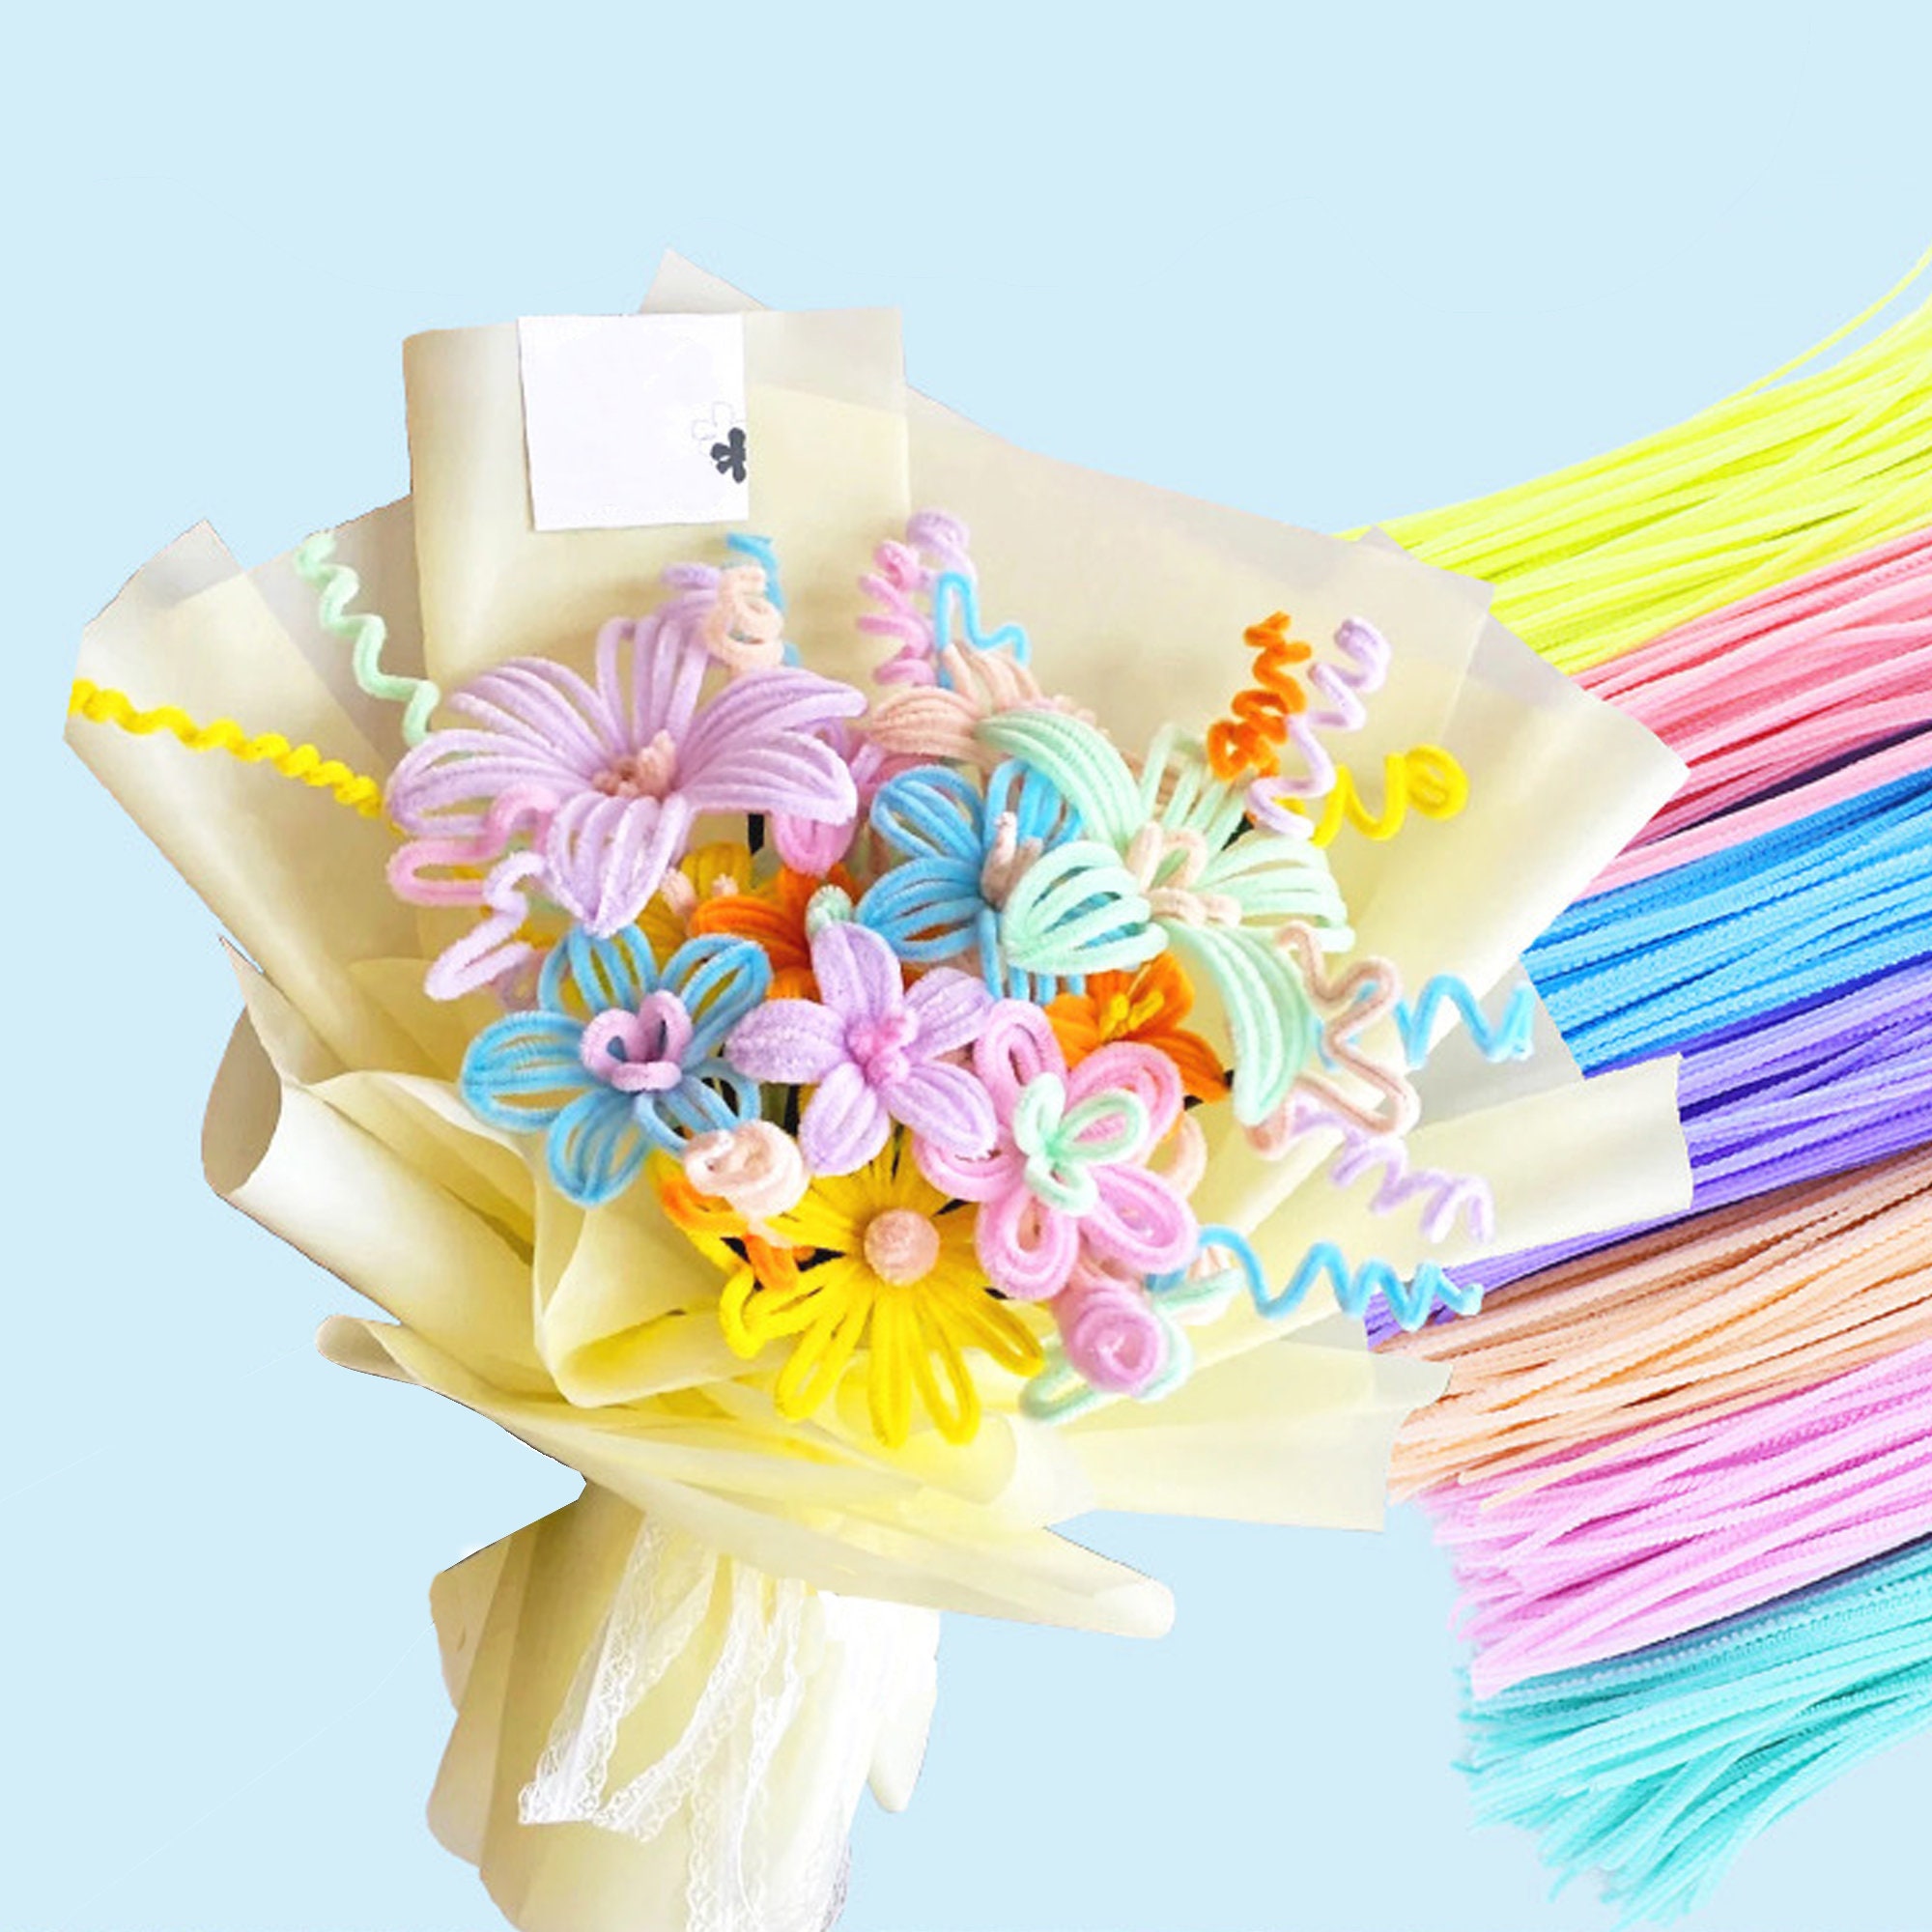 Hadade diy pipe cleaner flower home craft #handmade #diy #foryoupage #, pipecleaner flowers